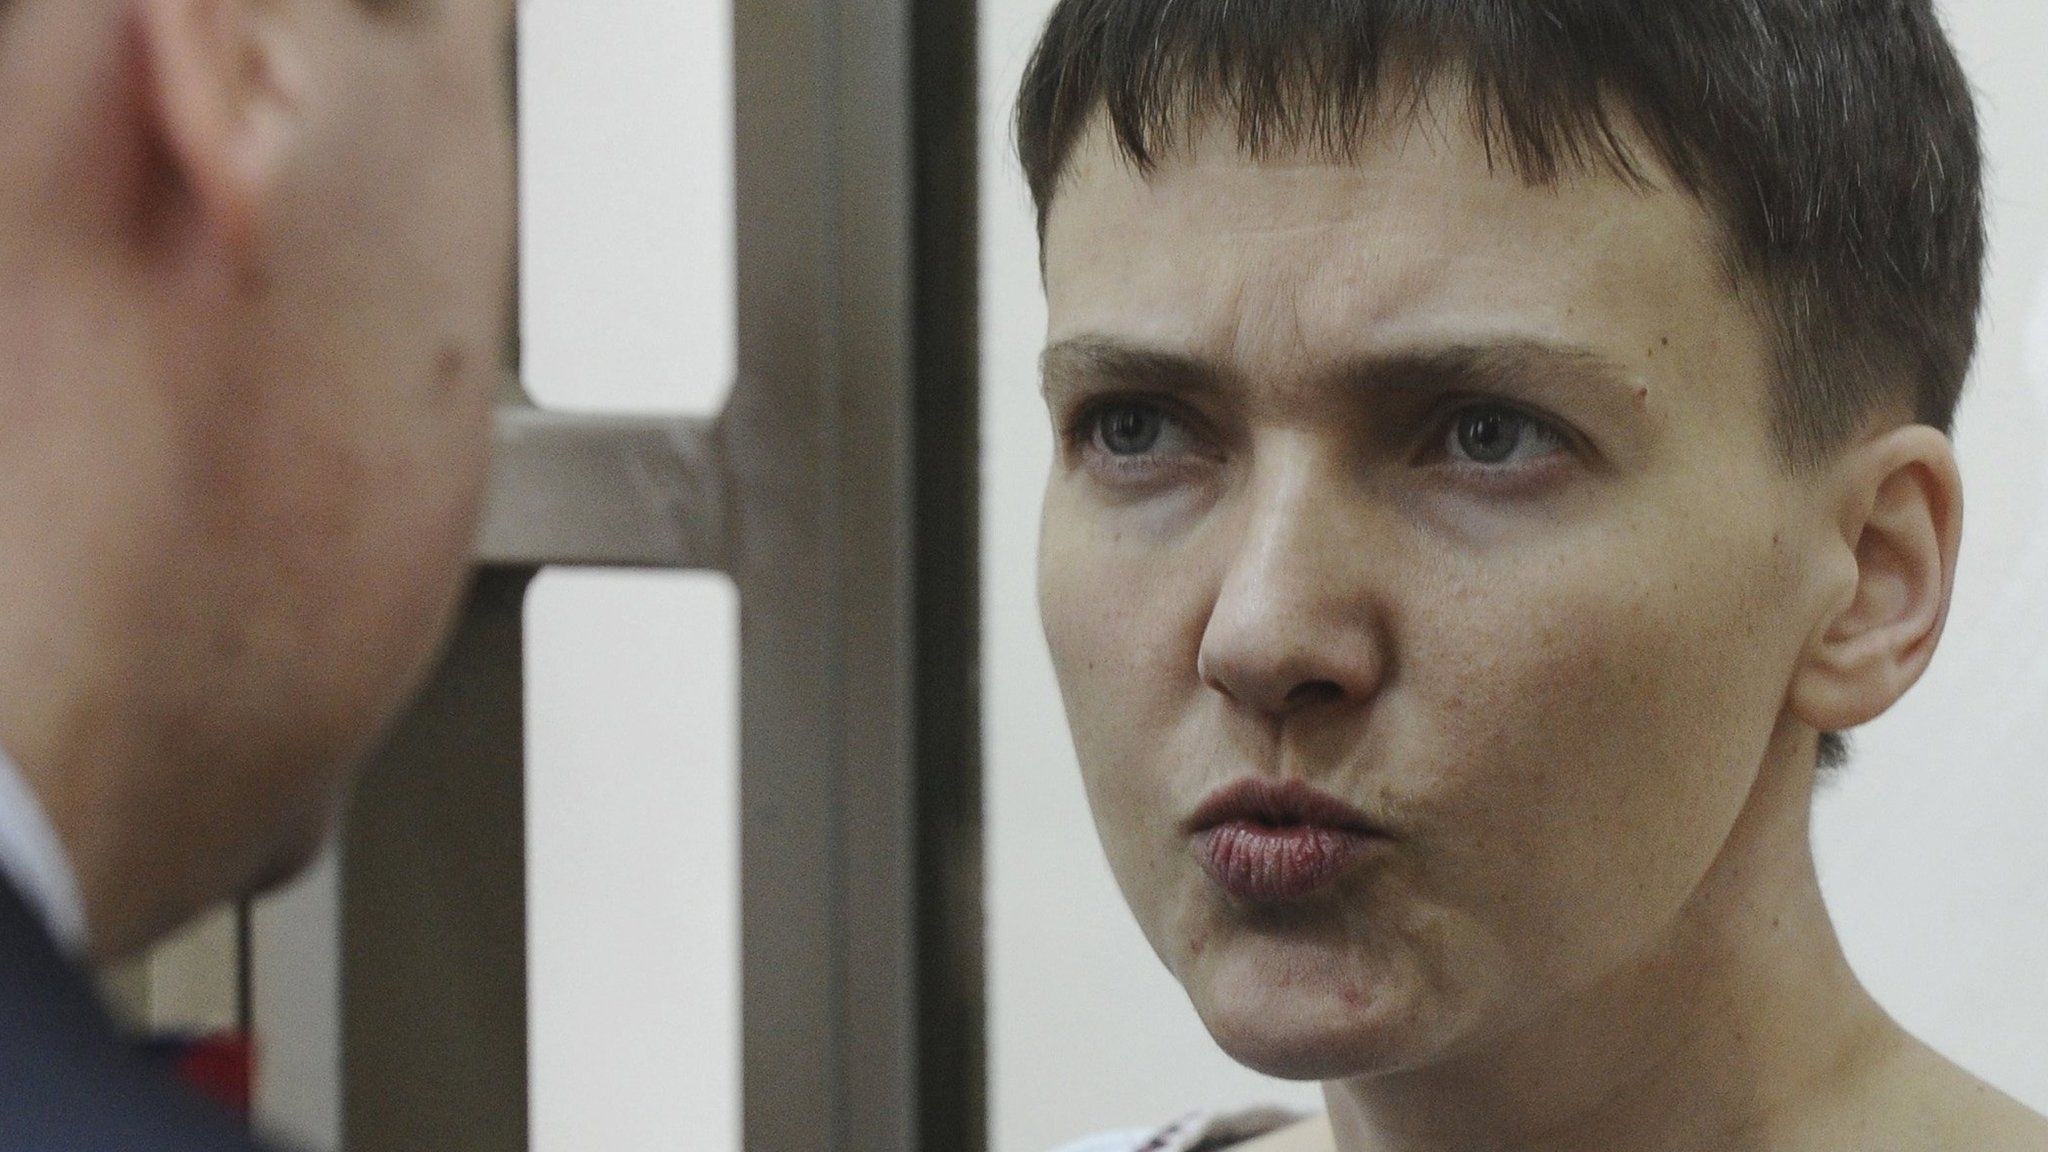 Ukrainian army pilot Nadia Savchenko talks to her lawyer Ilya Novikov from glass-walled cage in court hearing in town of Donetsk in Rostov region, Russia, March 3, 2016